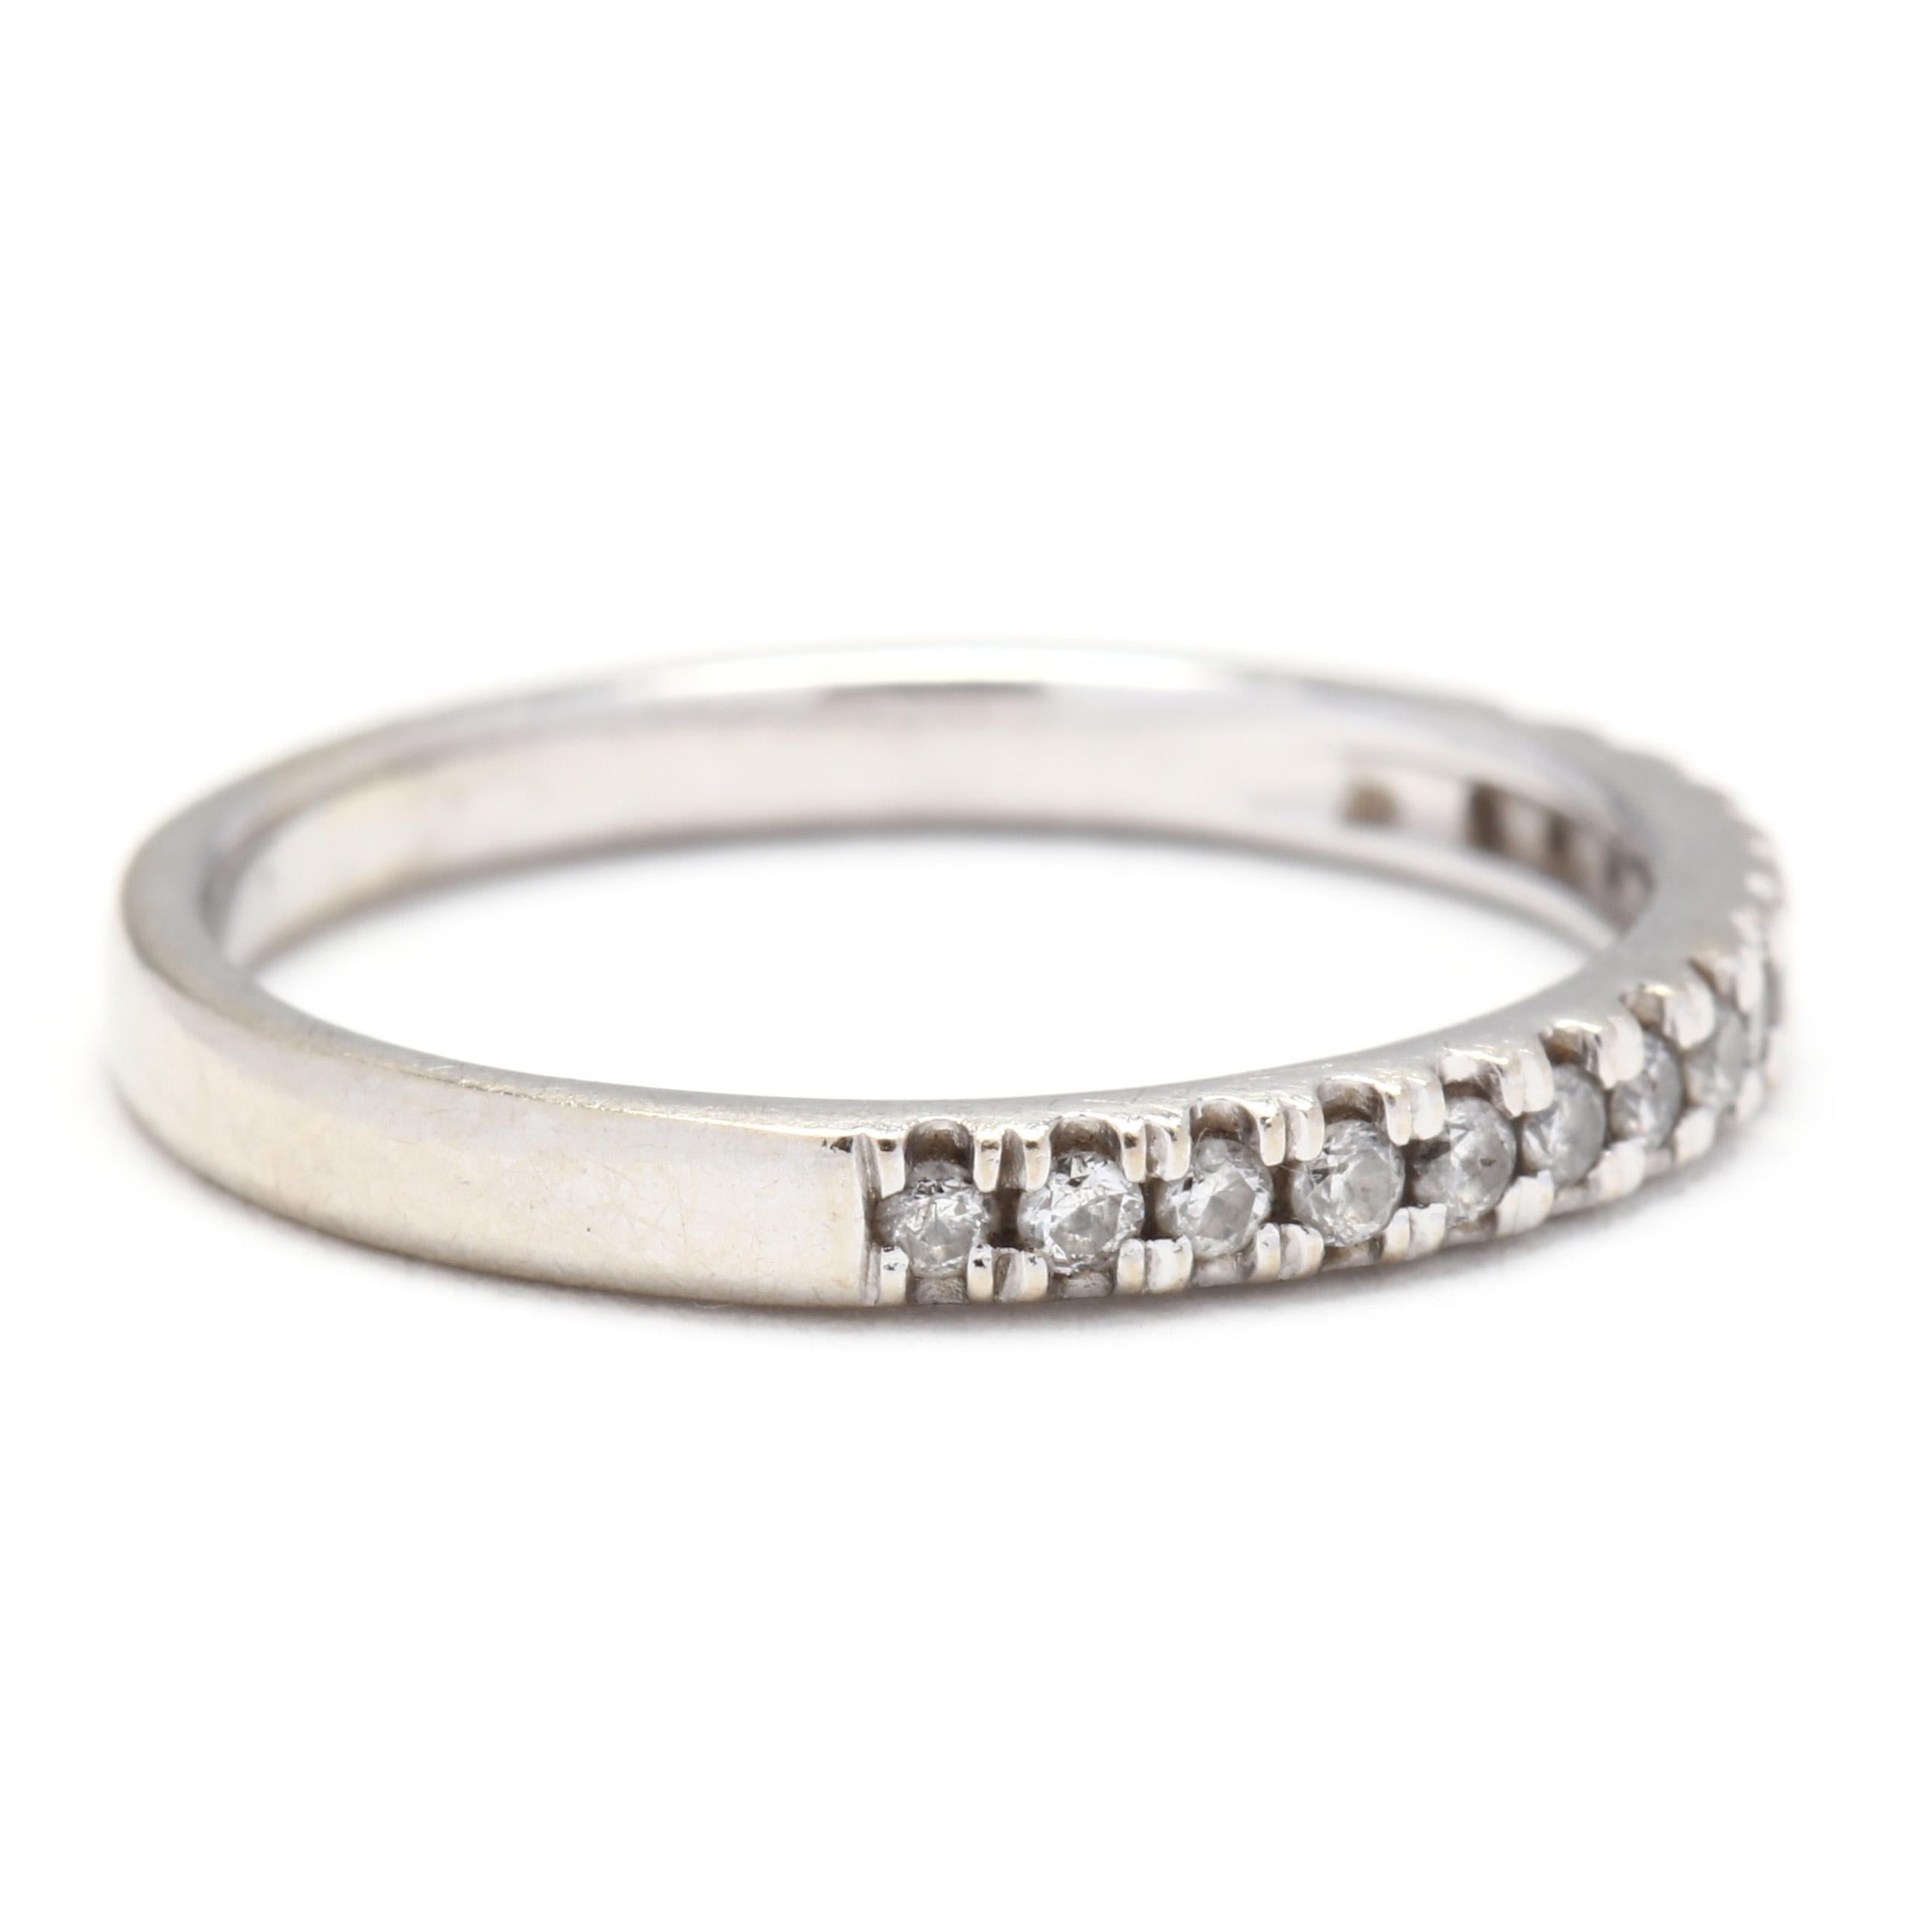 A 10 karat white gold and diamond stackable band ring. This ring features a single row of french set, full cut round diamonds weighing approximately .18 total carats and a thin shank.

Stones:
- diamonds
- full cut round, 15 stones
- 1.4 mm
-